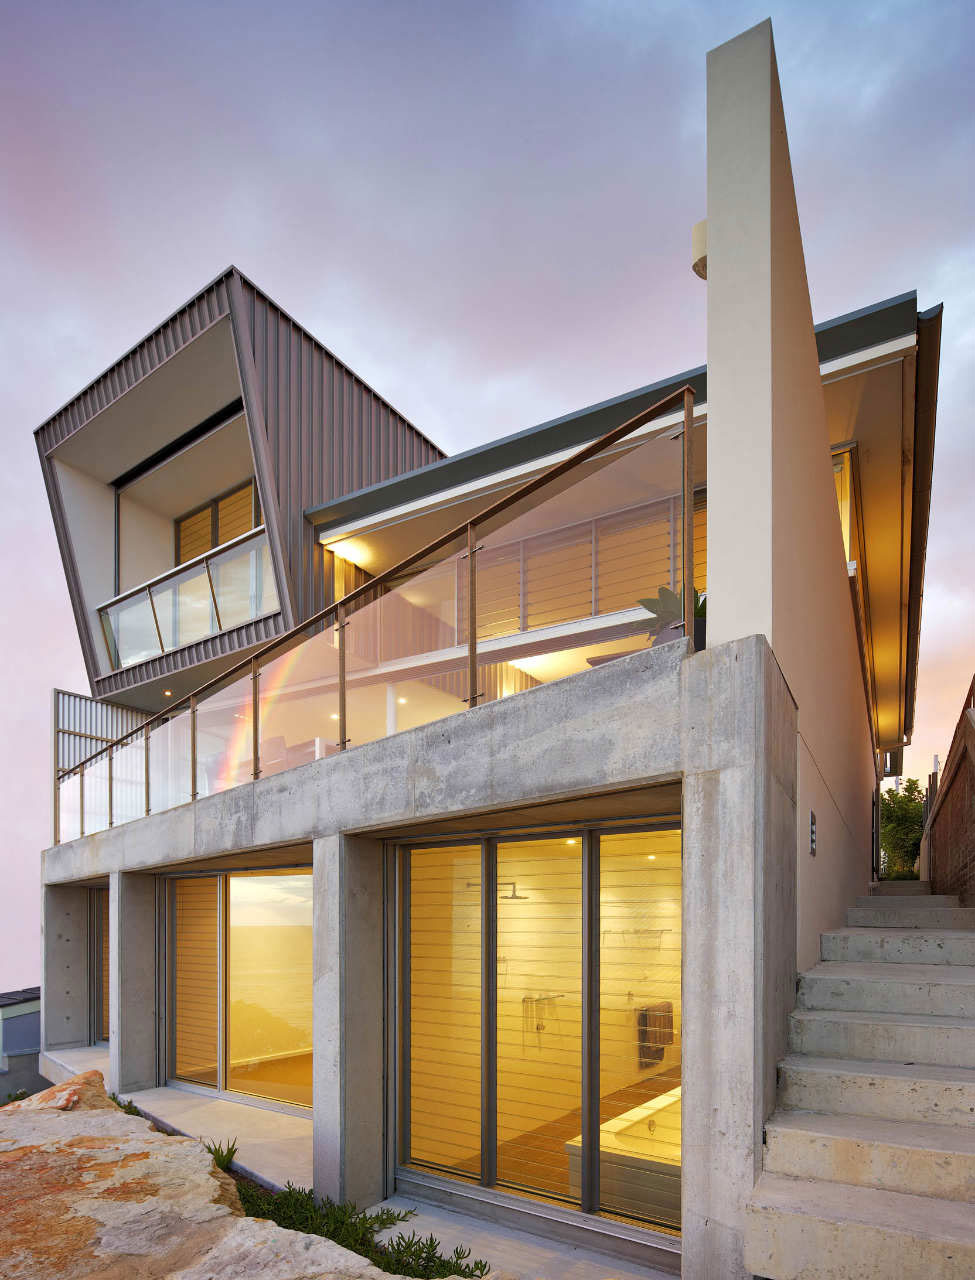 Queenscliff-House-by-Utz-Sanby-Architects Australian Architecture and some Beautiful Houses To Inspire You